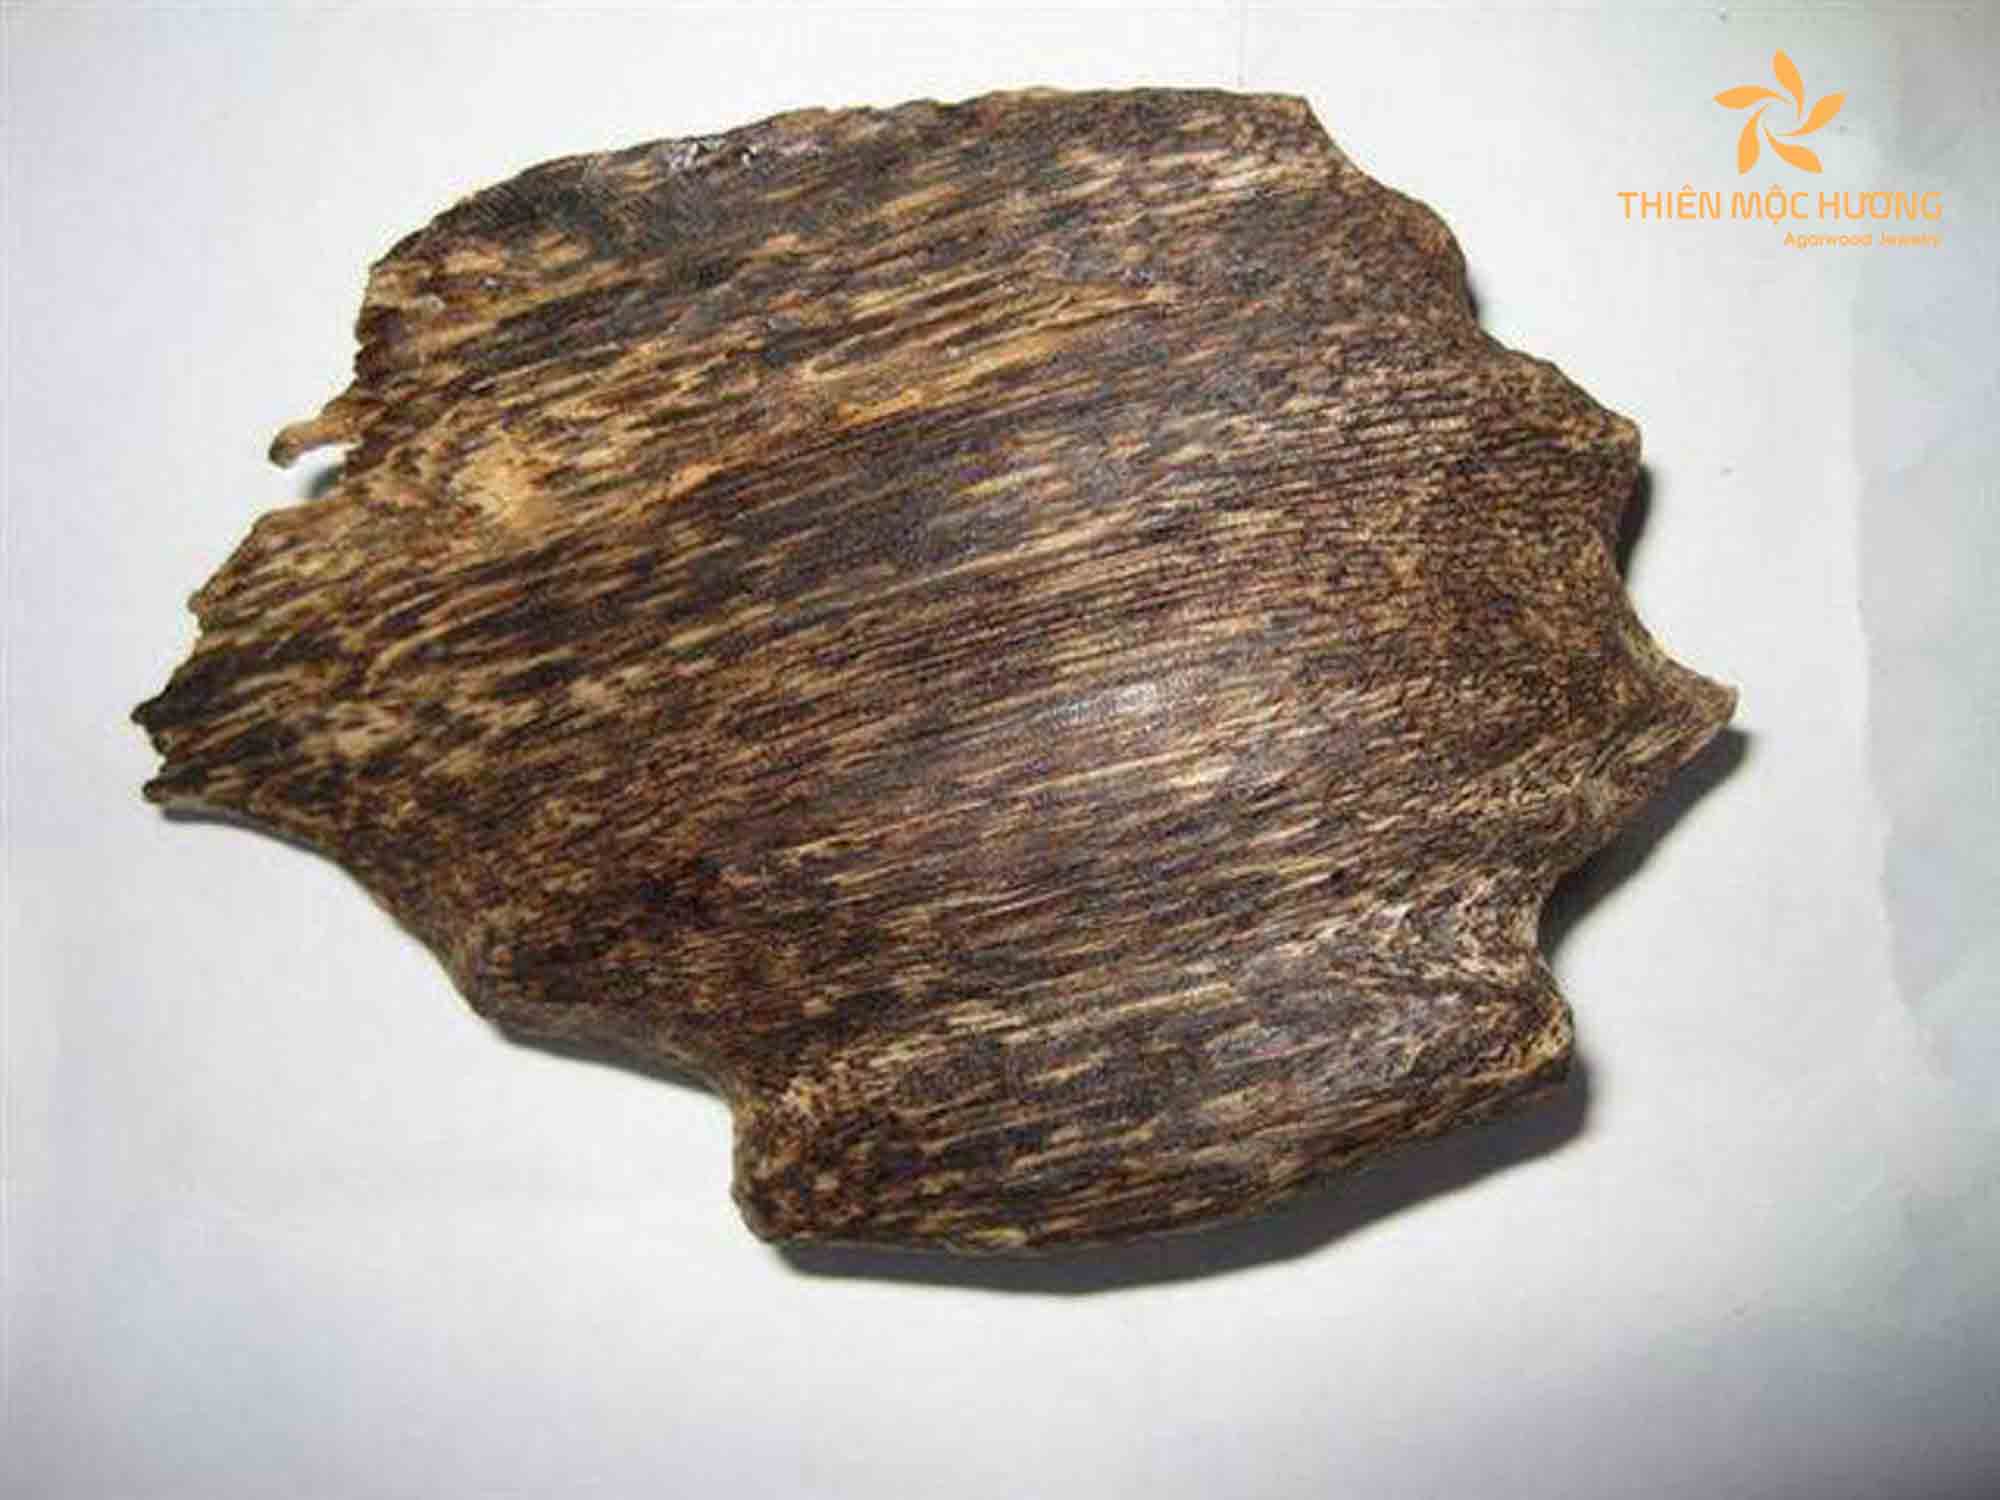 Agarwood can be used for a number of different purposes, including making incense, perfume, and even medicine.